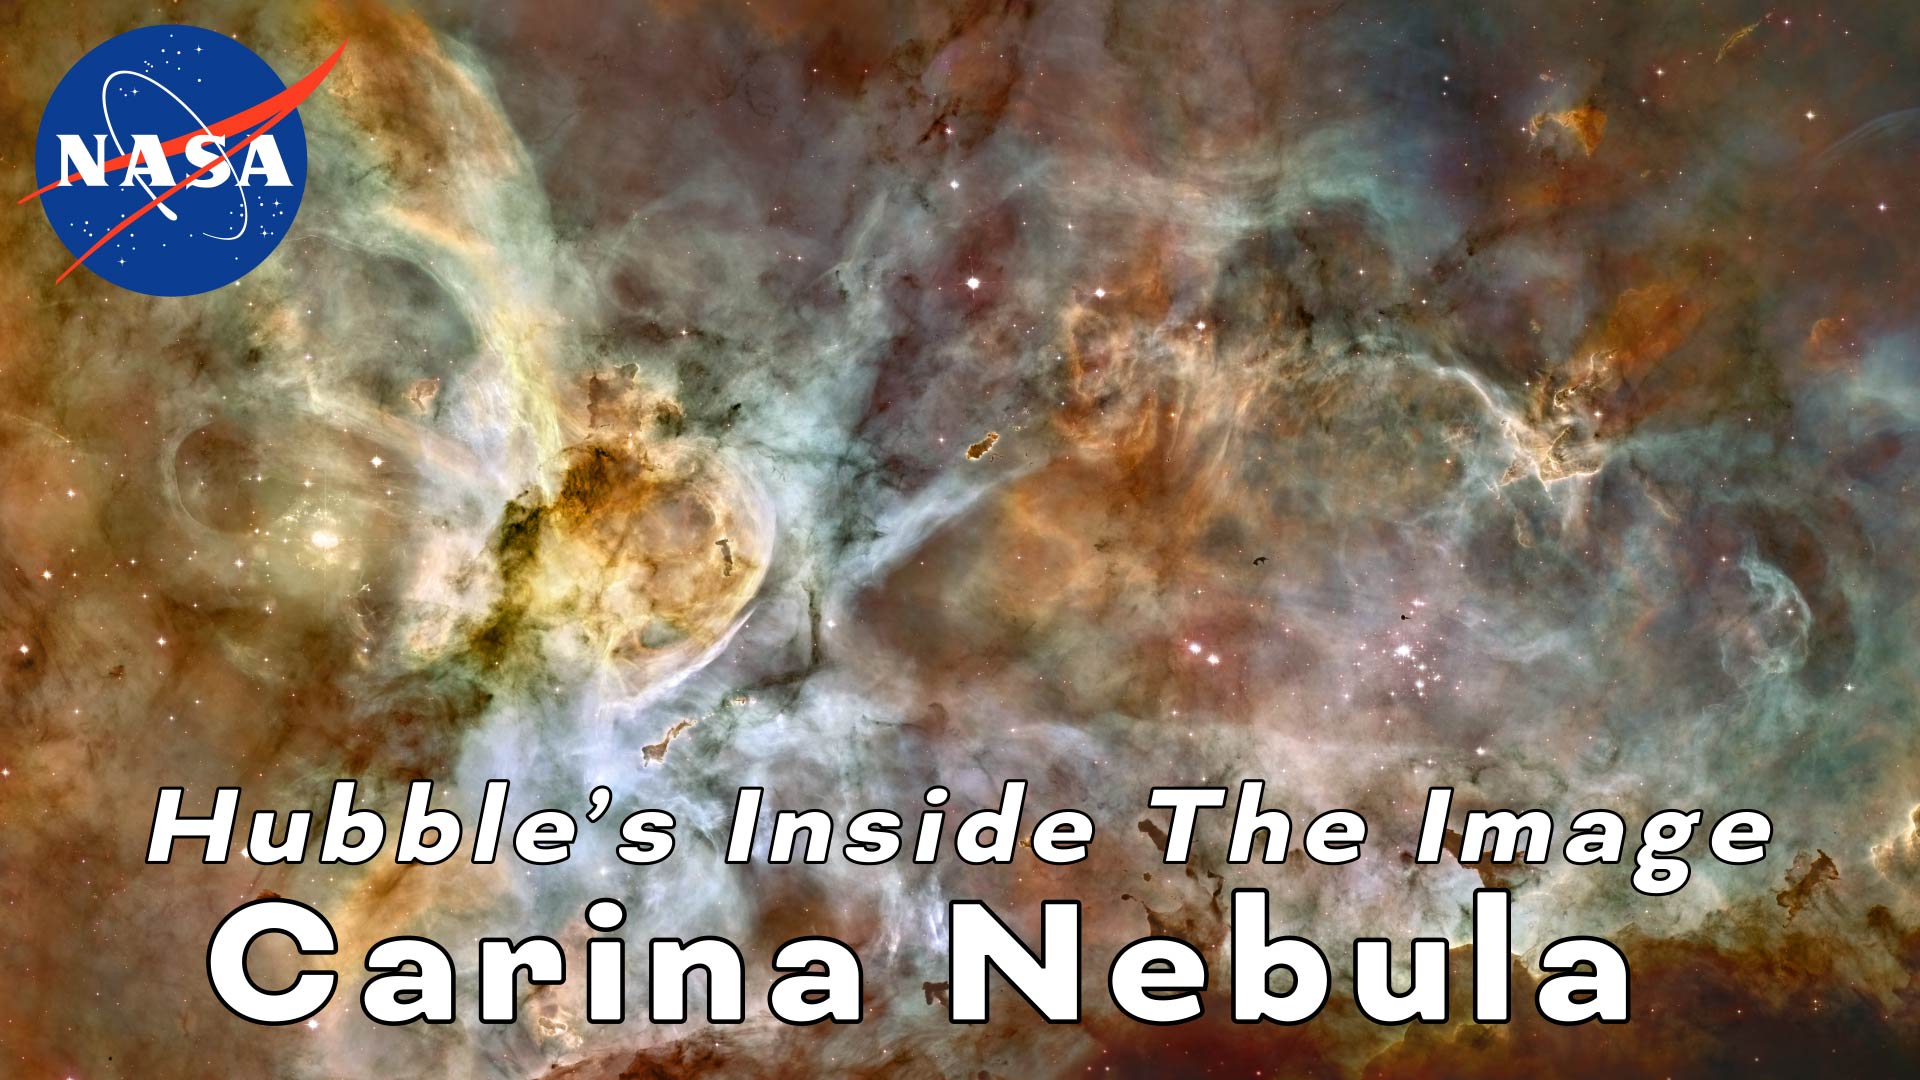 Preview Image for Hubble’s Inside The Image: Carina Nebula